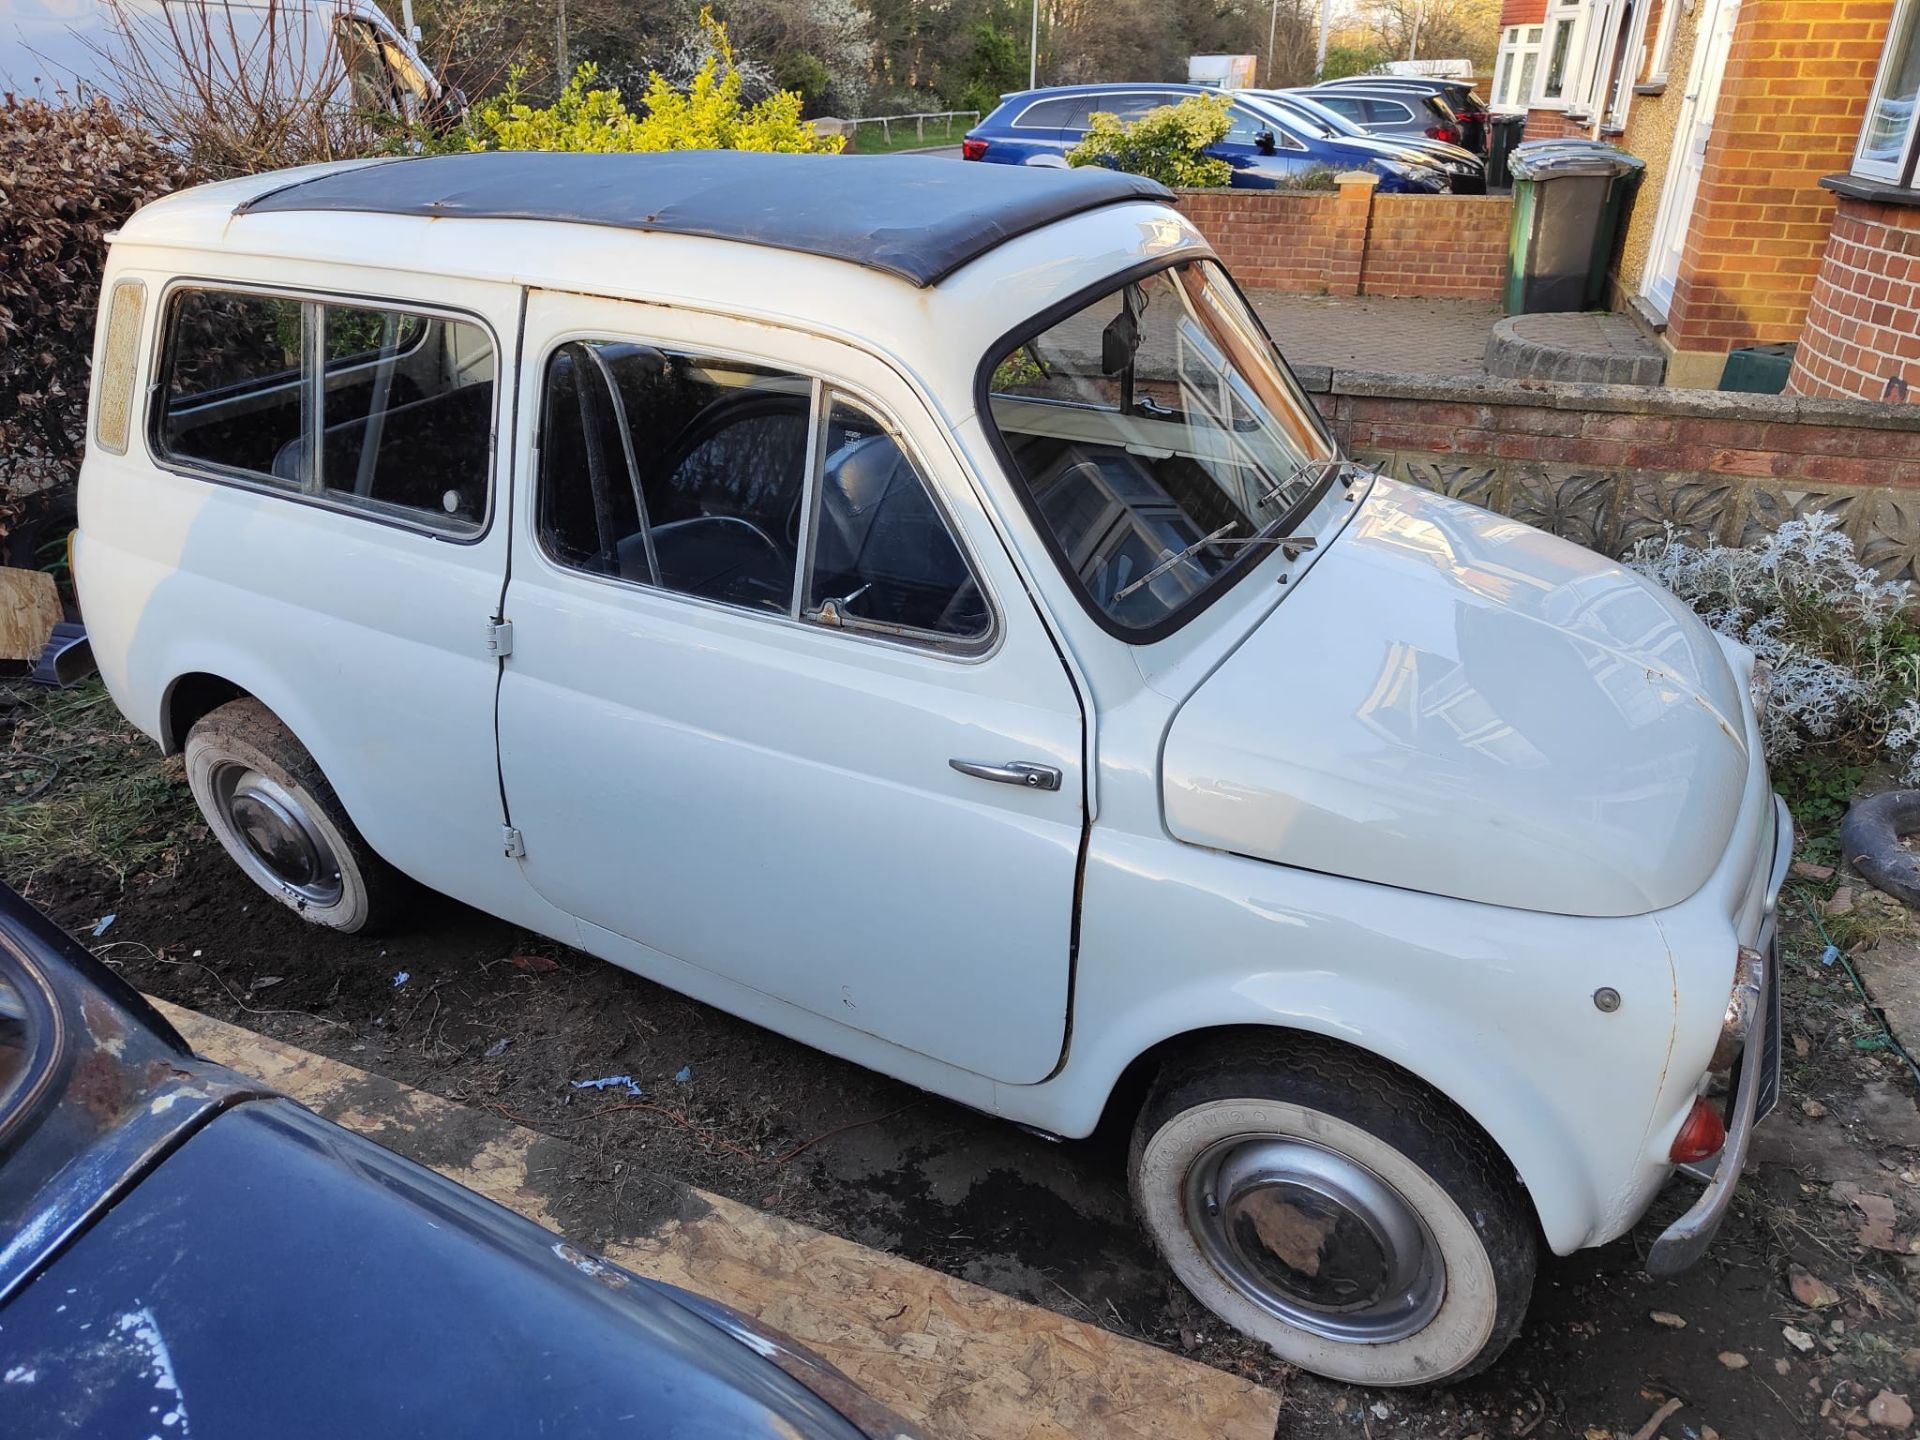 1971 FIAT 500 GIARDINIERA (RHD) Registration Number: KUW 494K Chassis Number: TBA Recorded